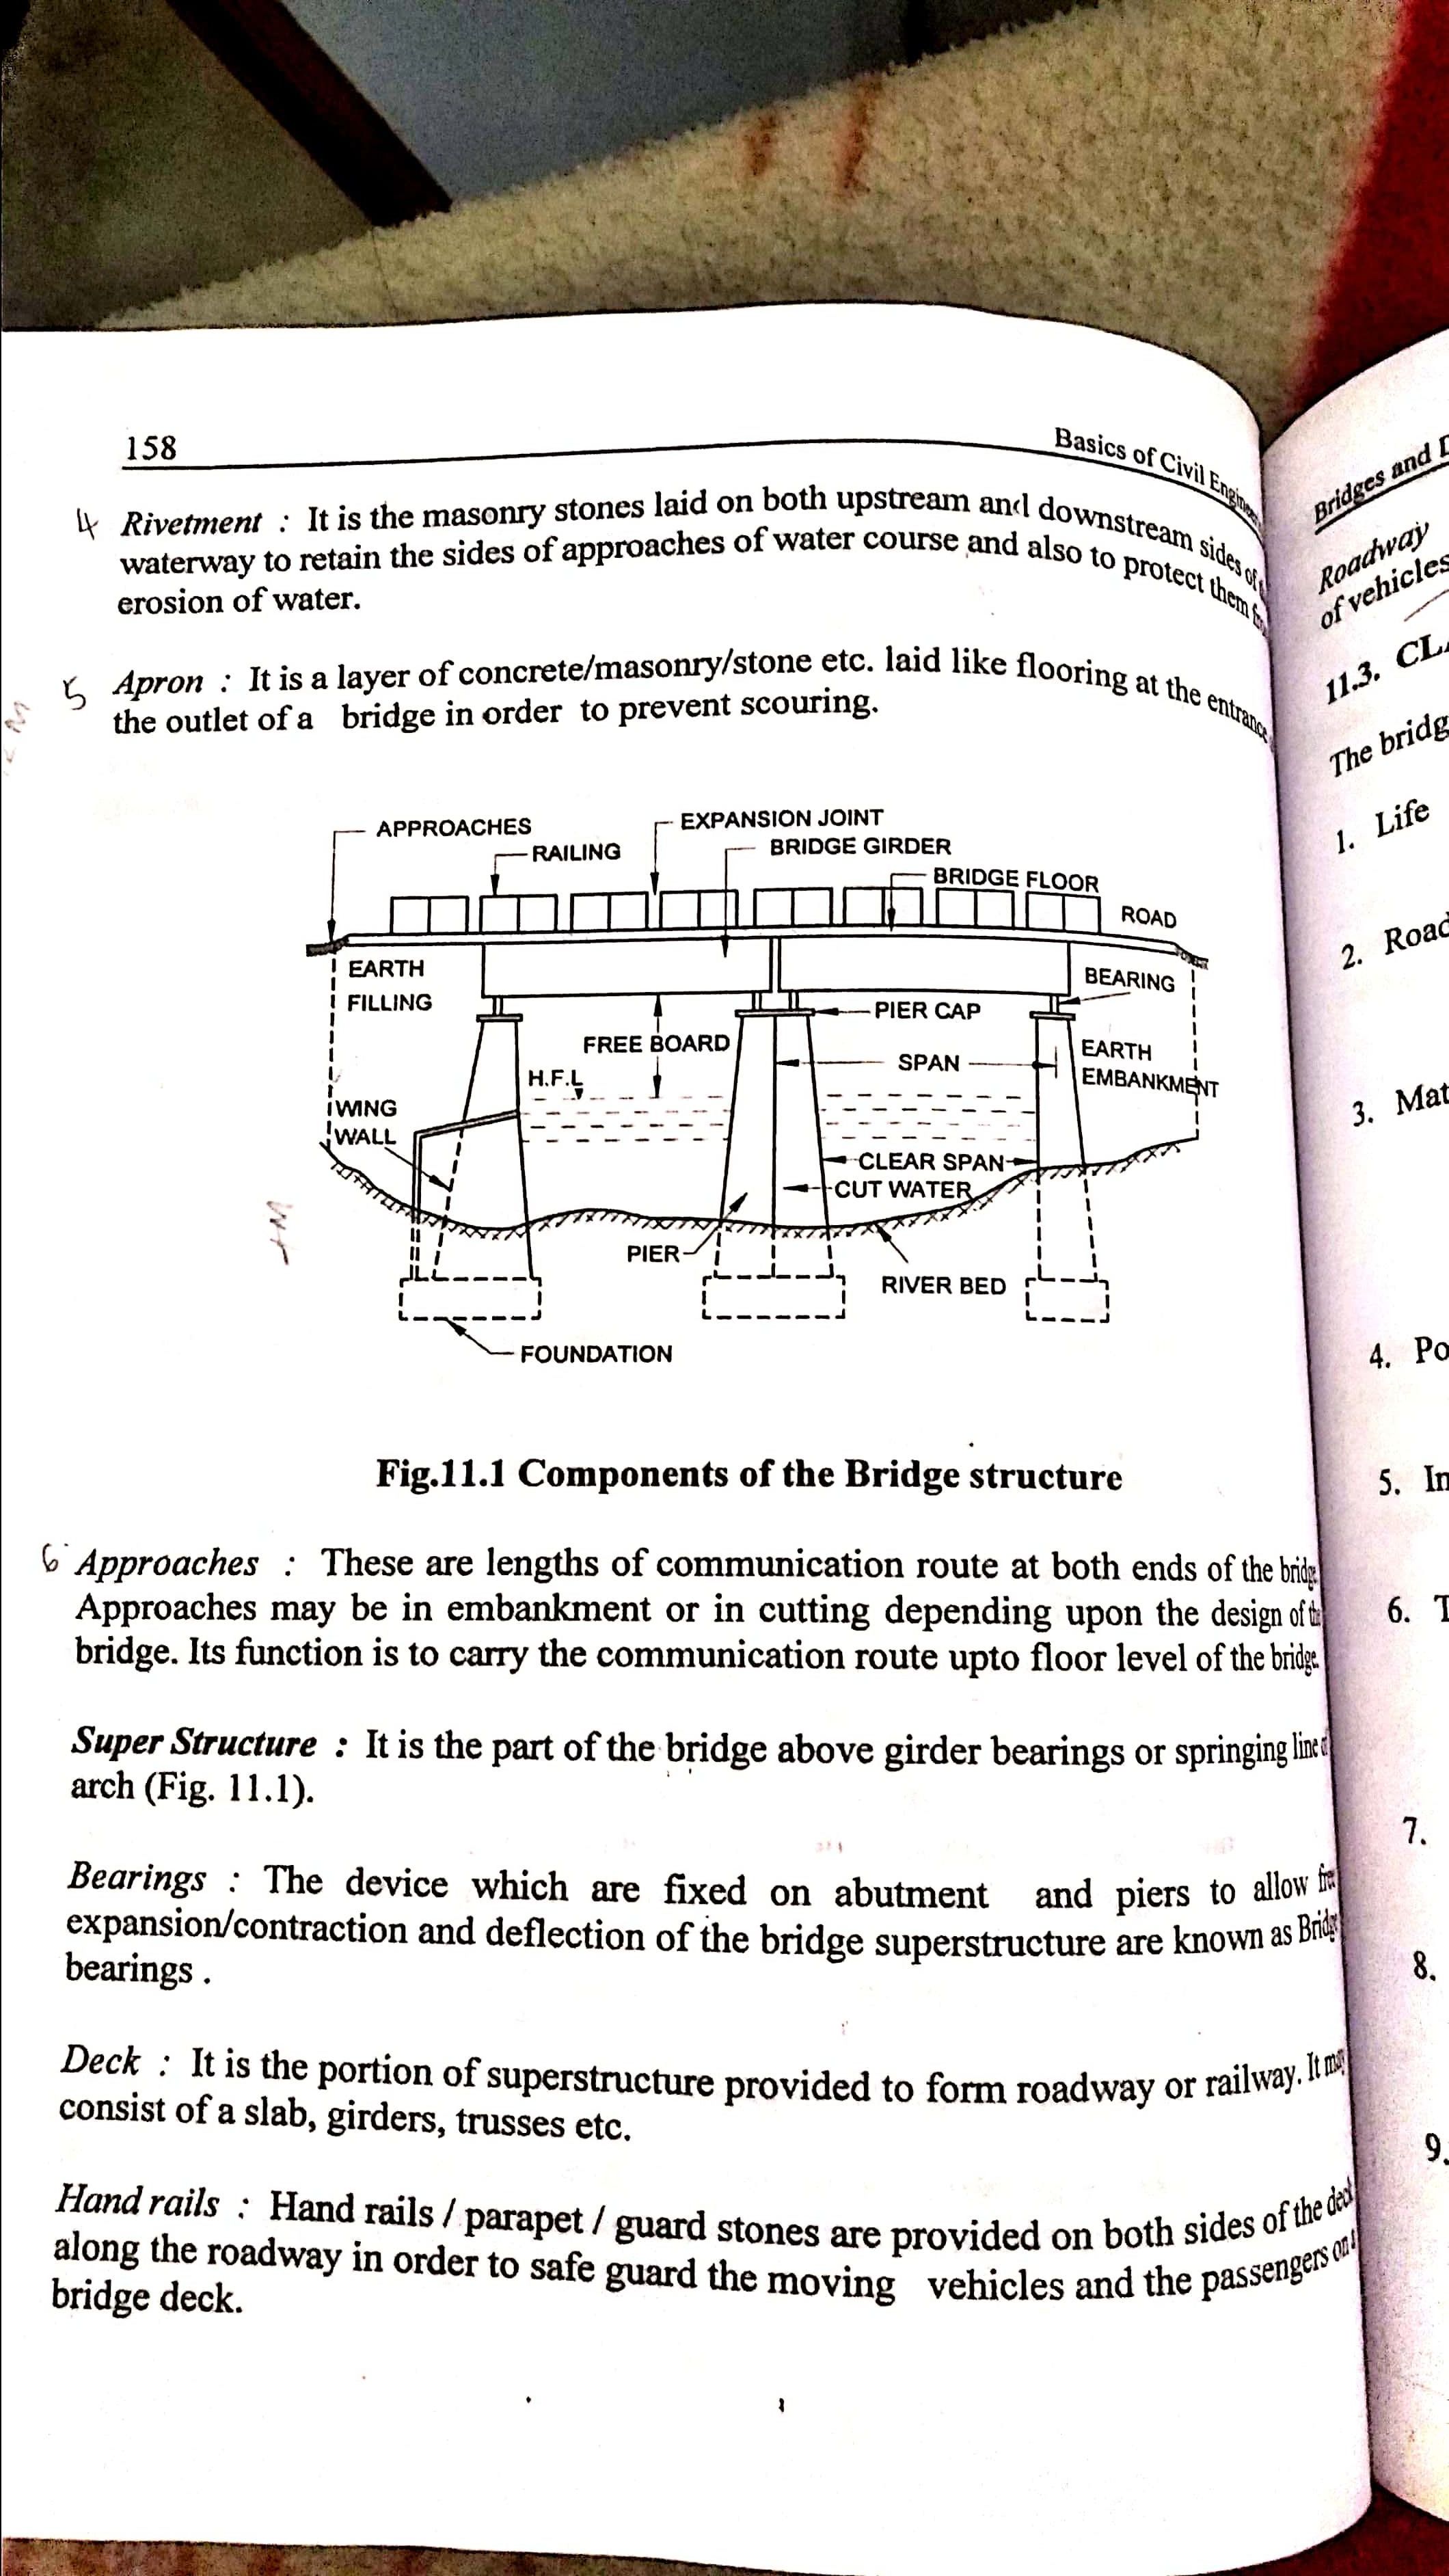 Components of the bridge structure -New Doc 2019-11-30 20.41.41_69.jpg